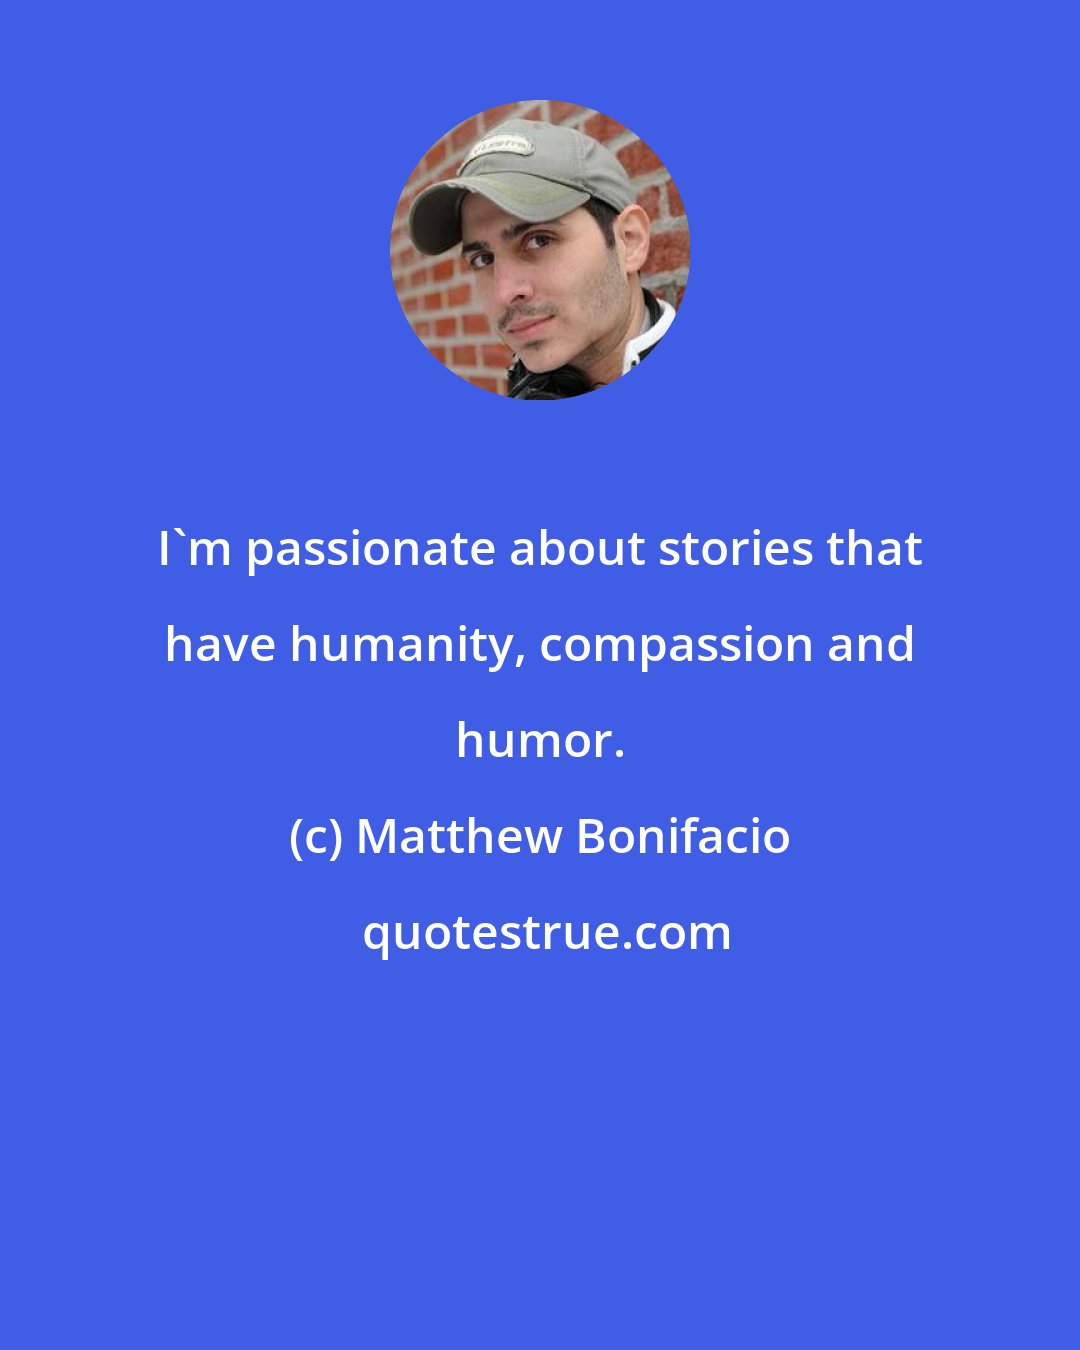 Matthew Bonifacio: I'm passionate about stories that have humanity, compassion and humor.